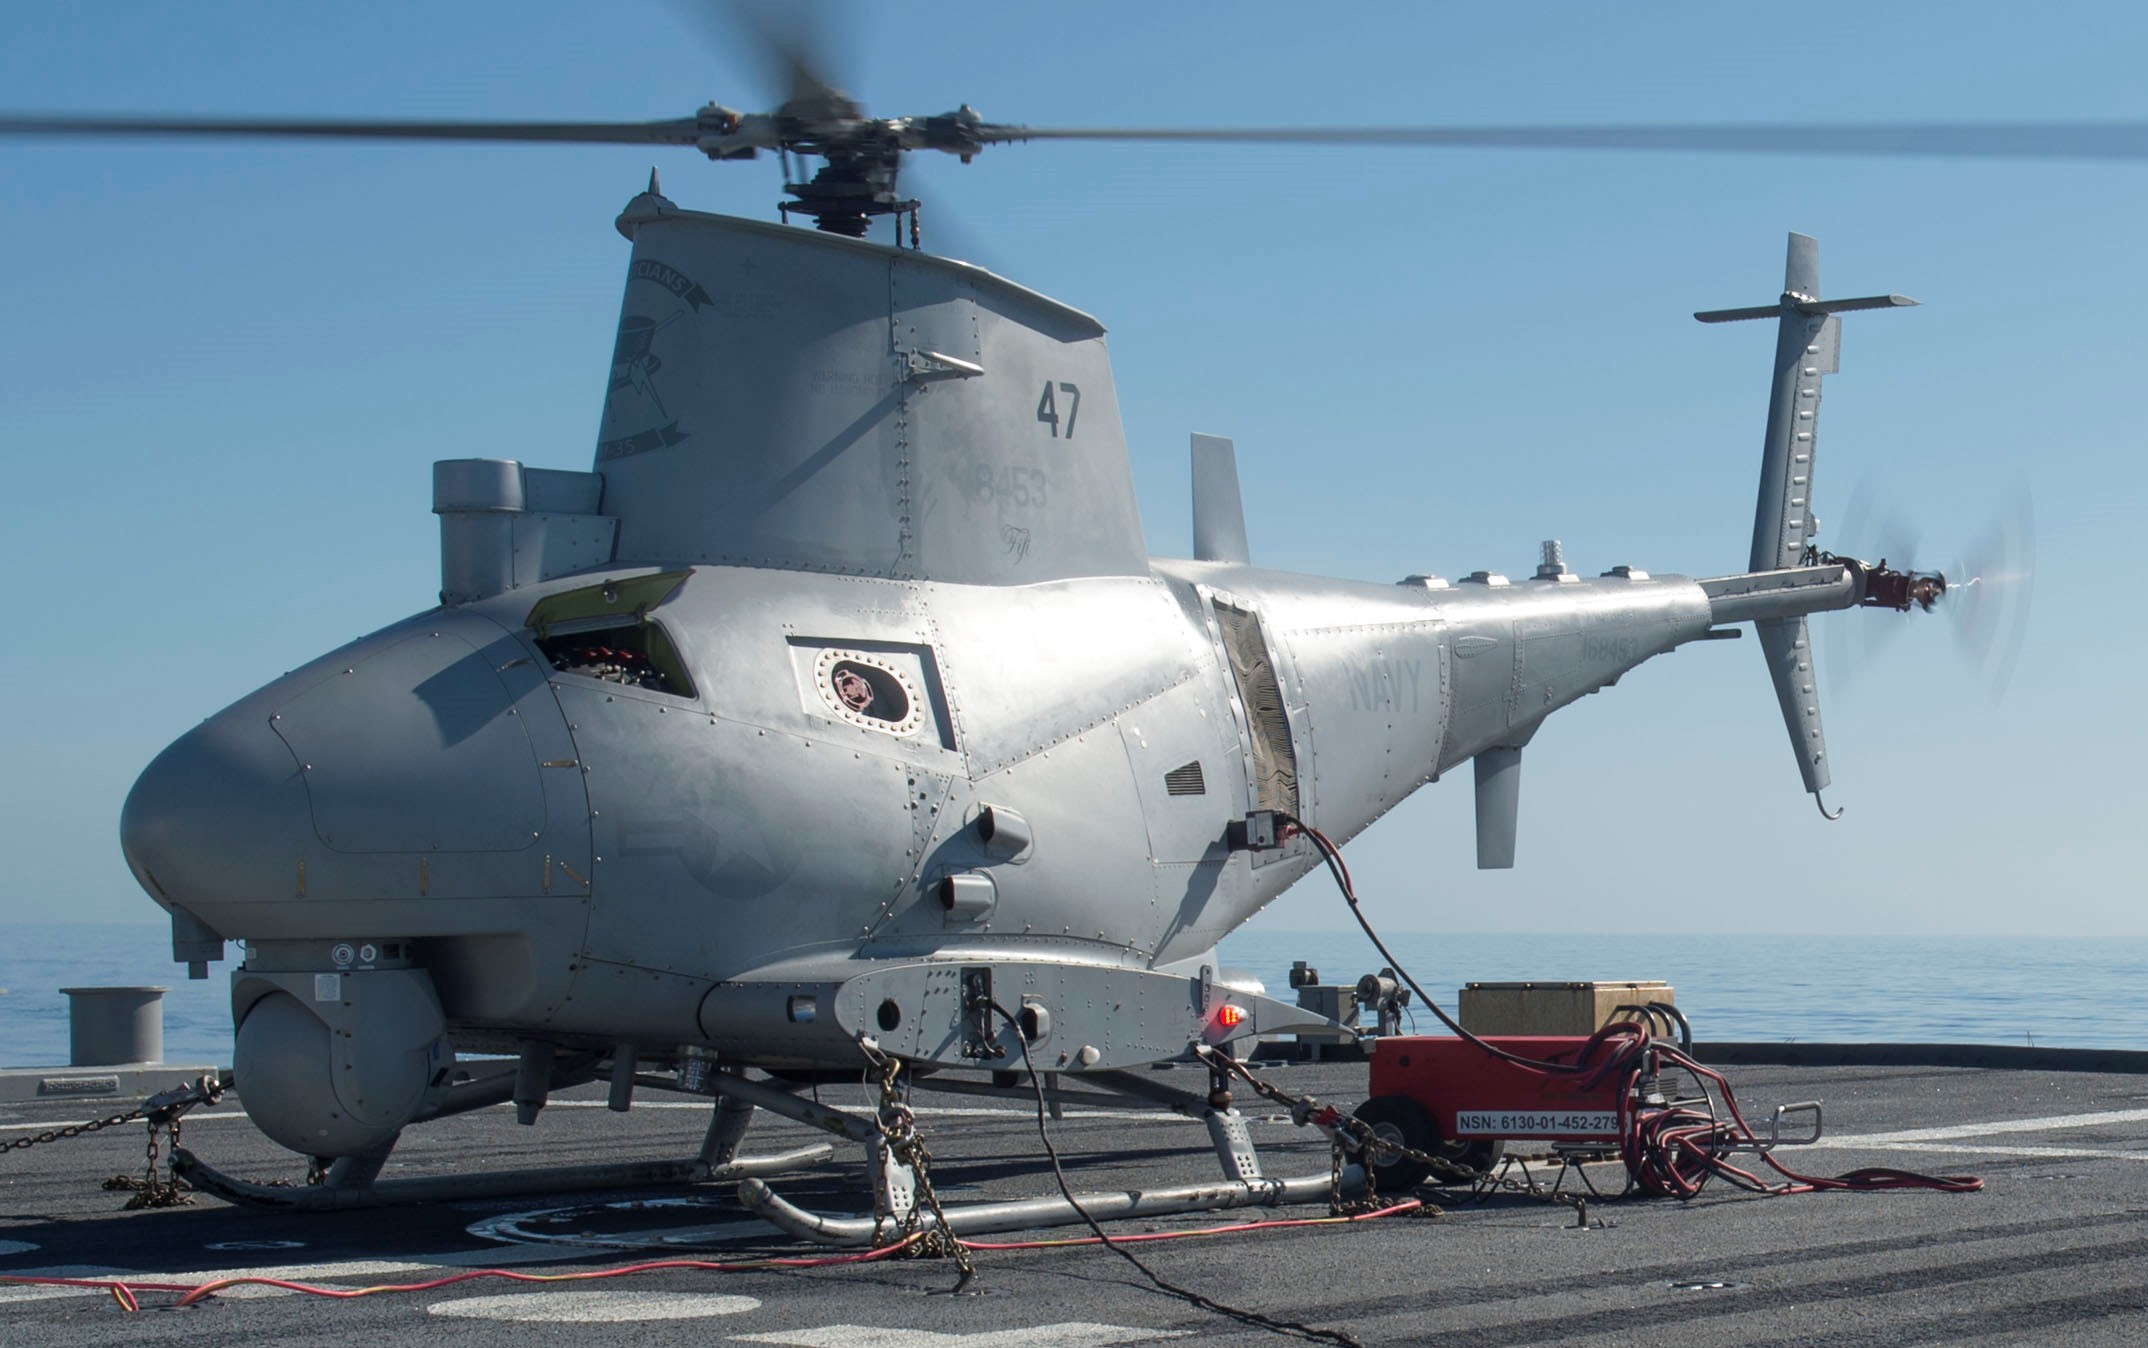 hsm-35 magicians helicopter maritime strike squadron us navy mq-8b fire scout uav 28